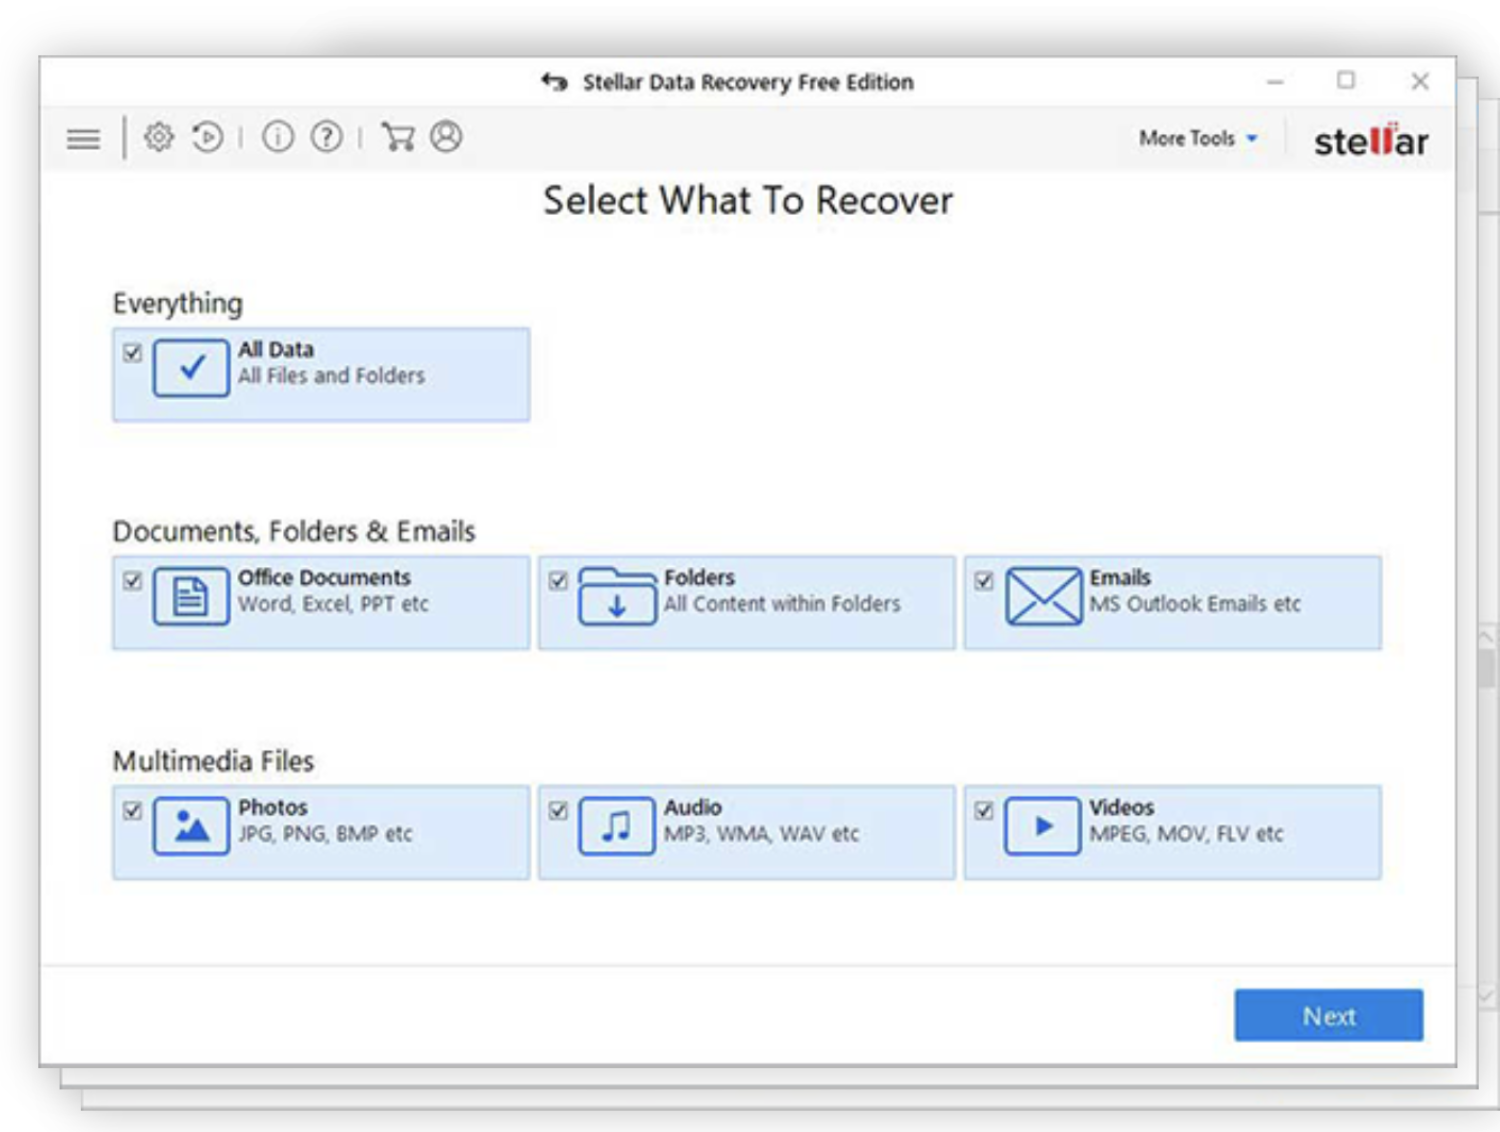 Stellar Releases free version of Data Recovery Software for macOS, Windows